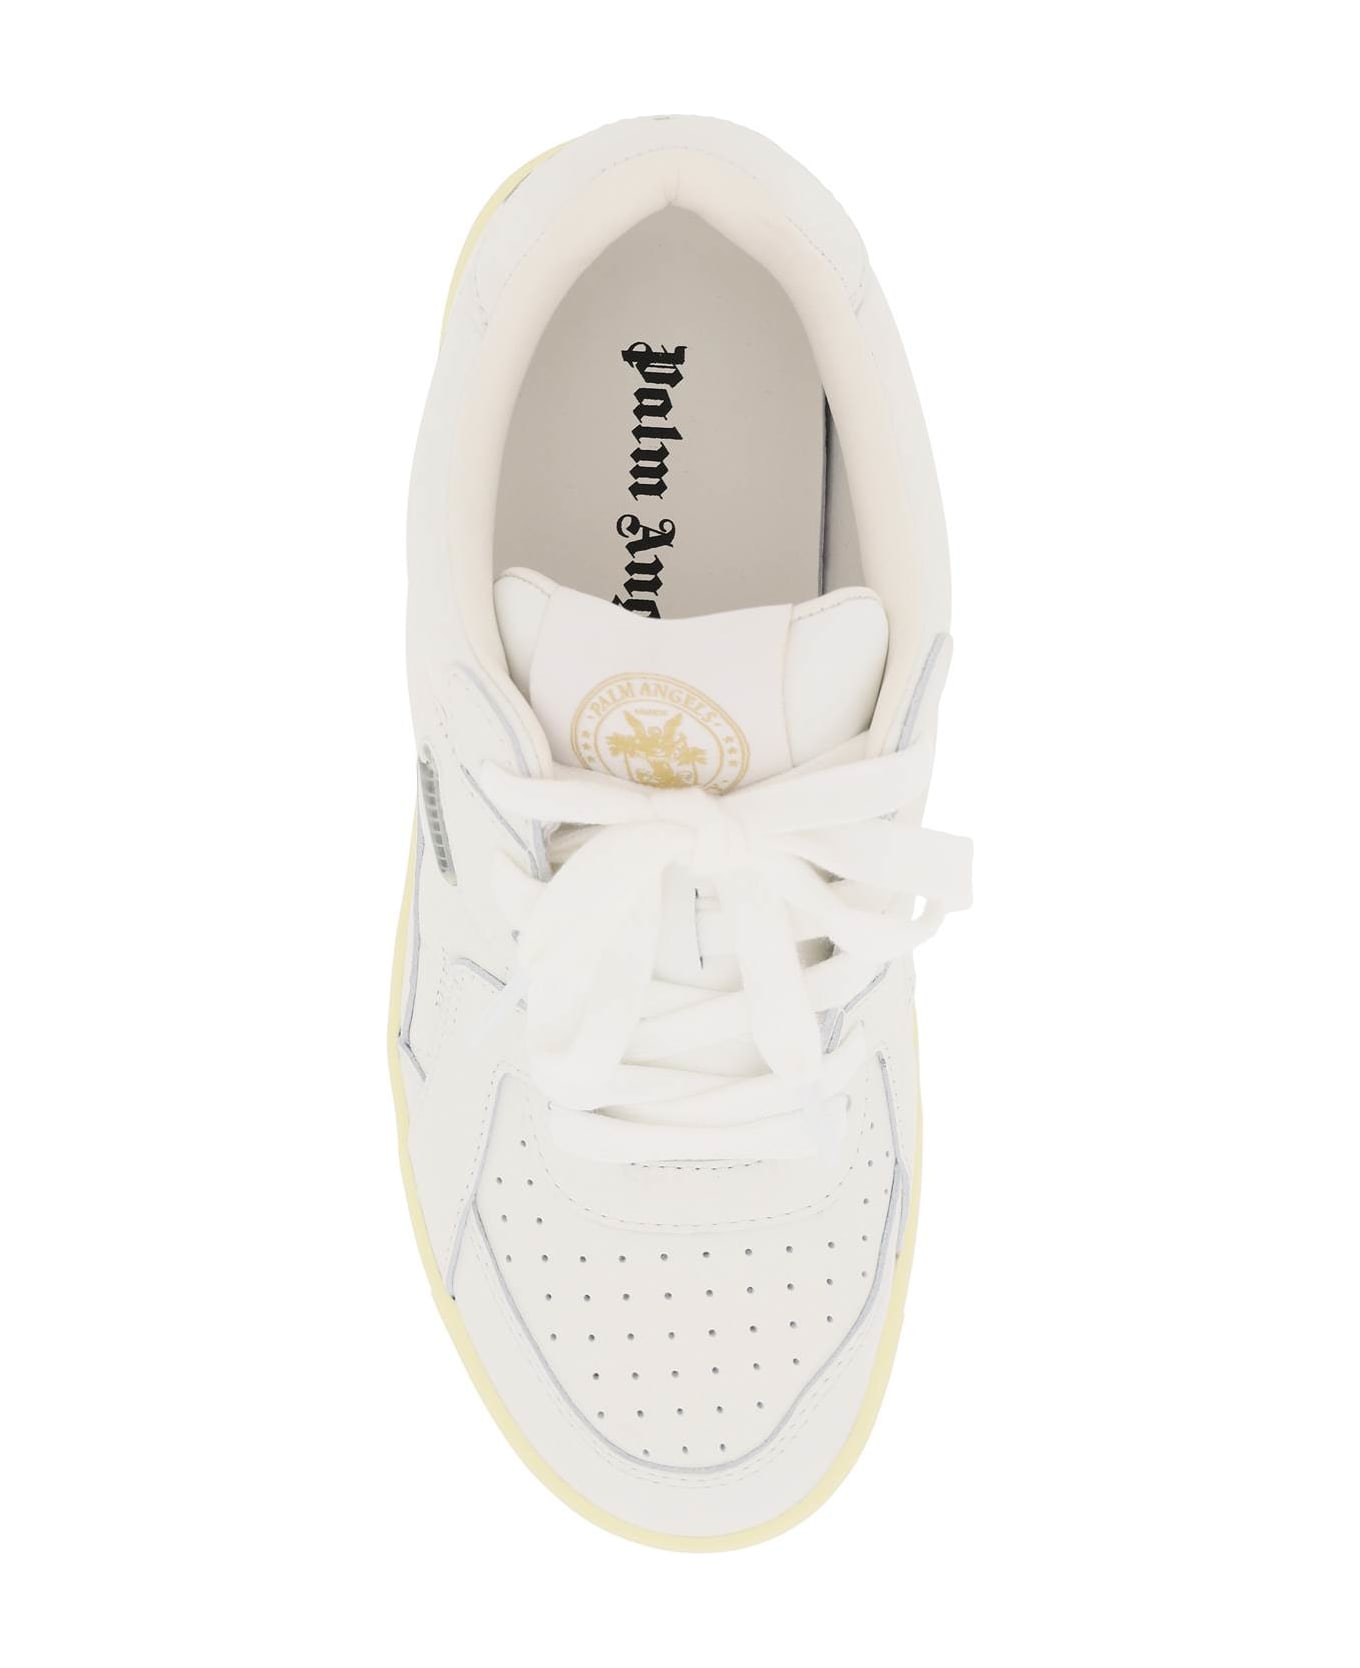 Palm Angels University Leather Sneakers - WHITE WHITE (White)